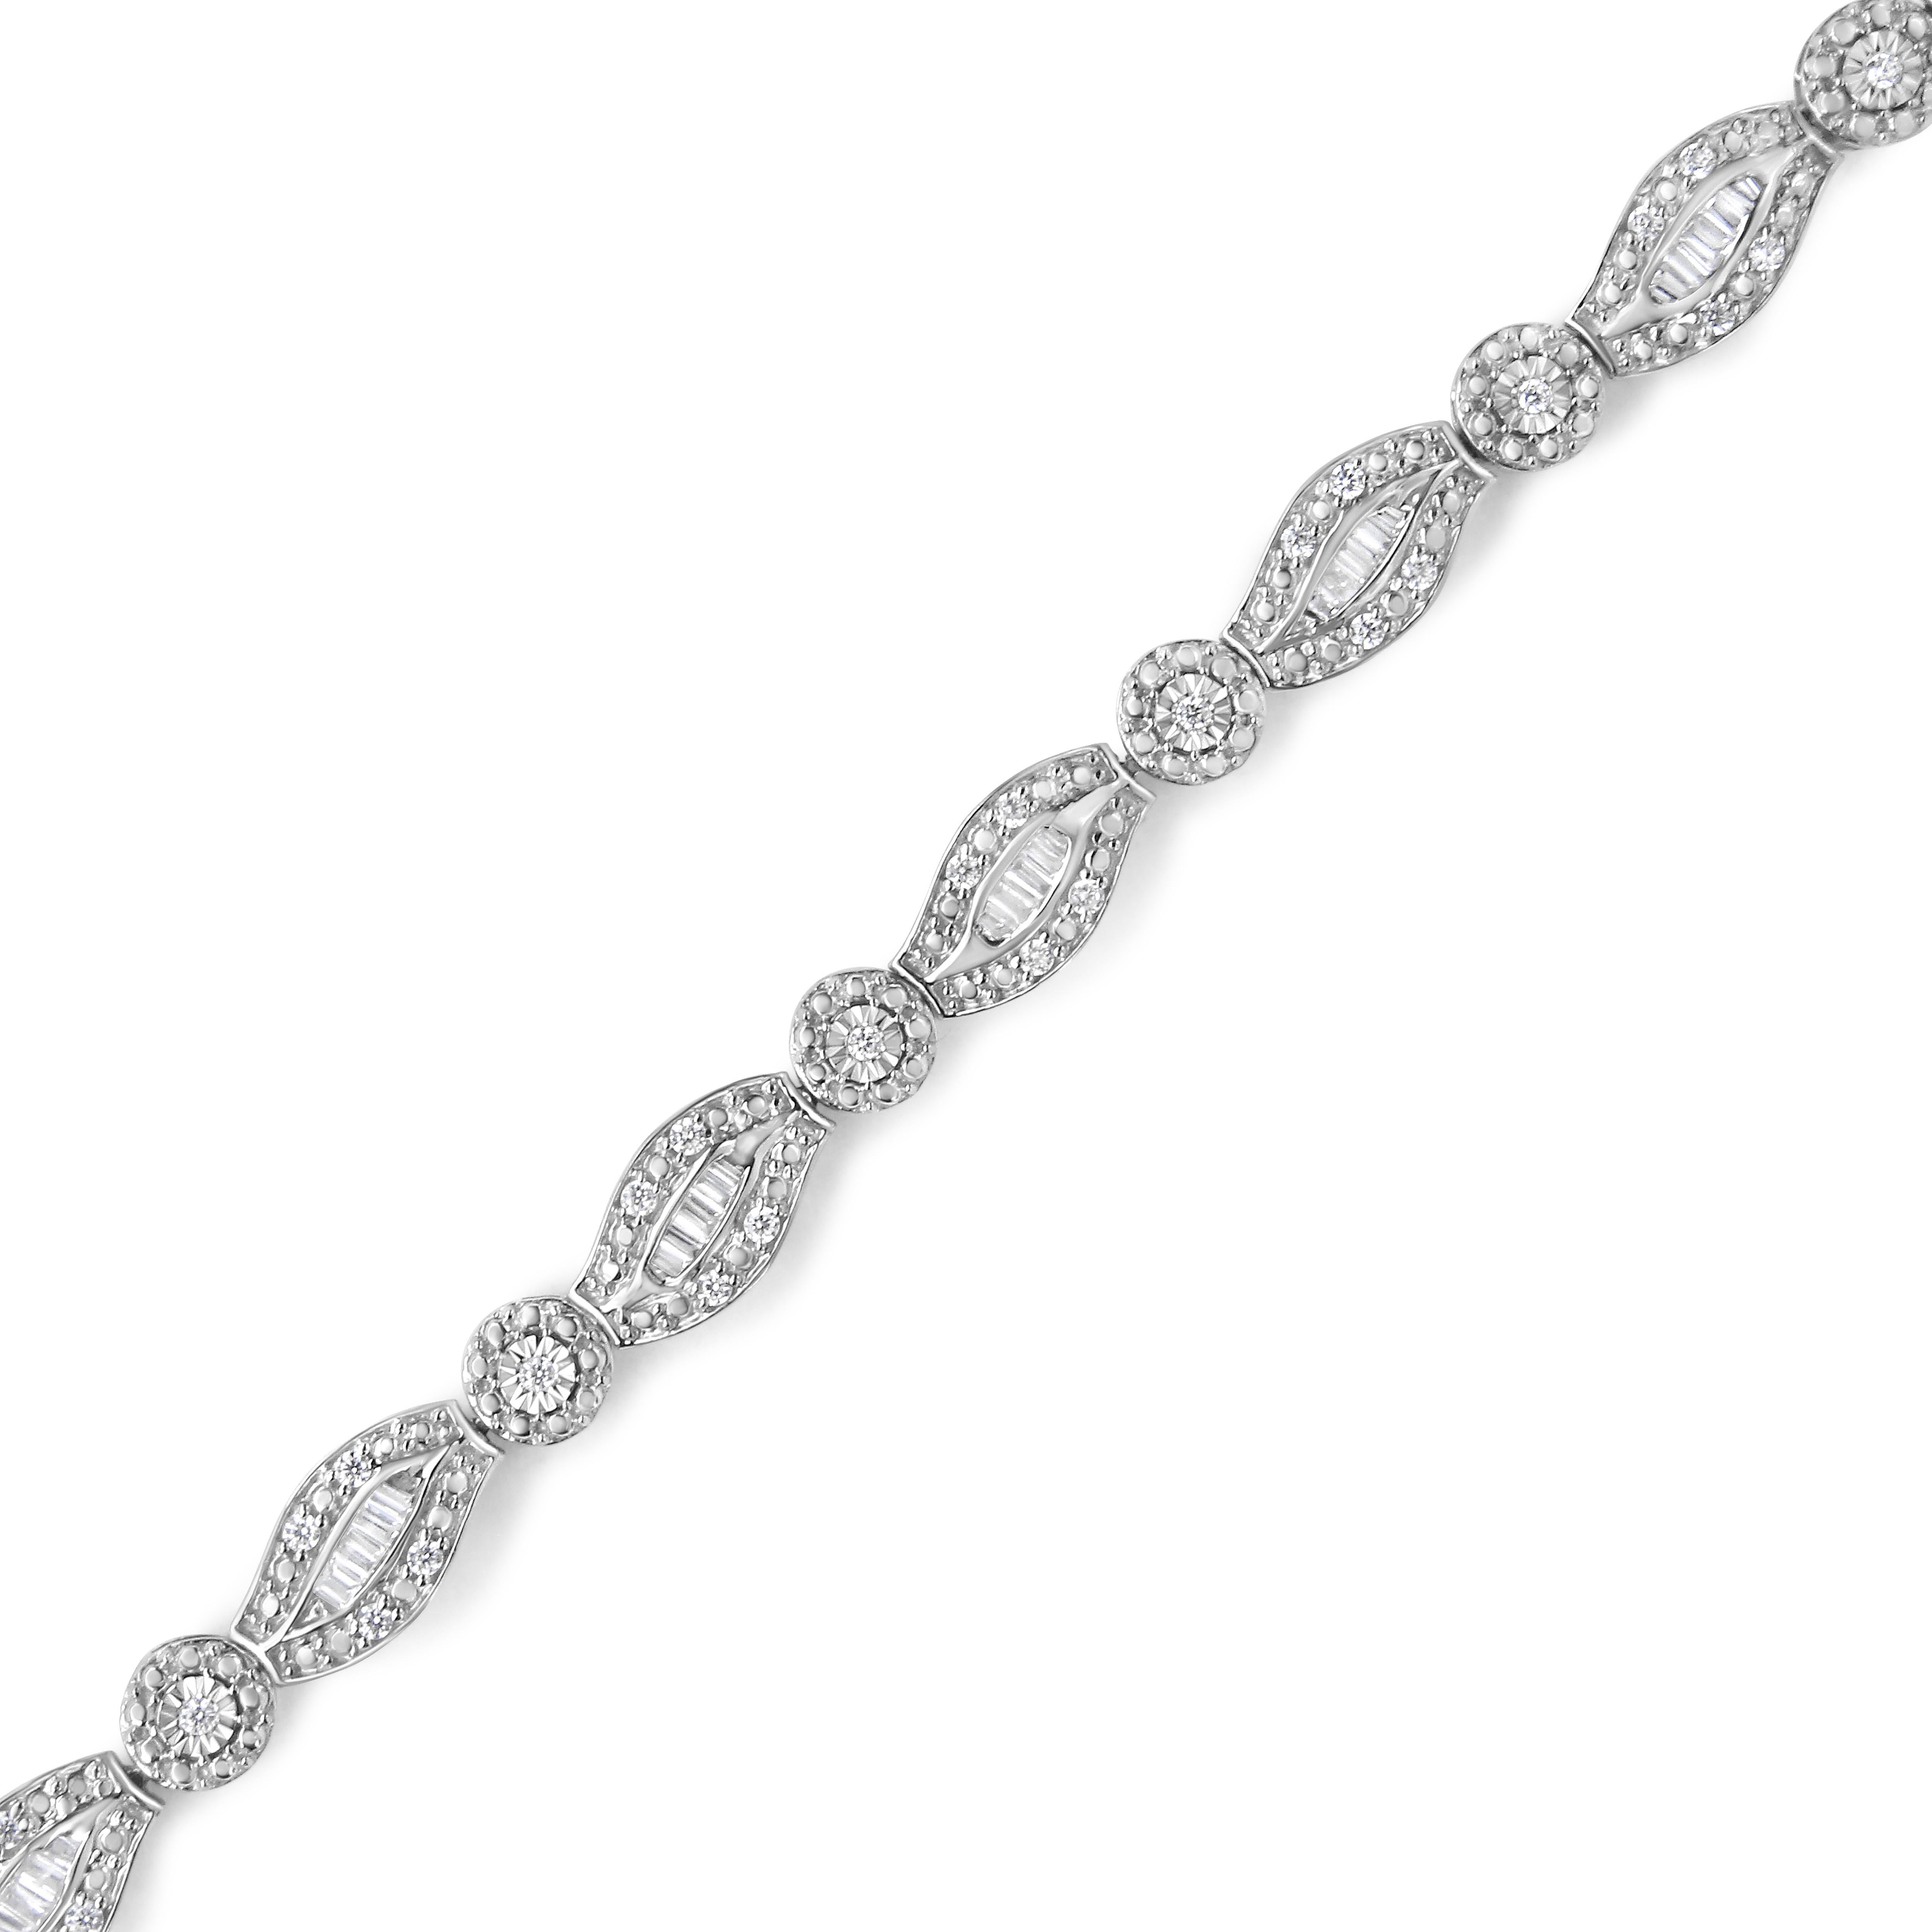 Add a little sparkle to your outfit with this lovely sterling silver link bracelet that features 1 ct TDW of diamonds. A round cut diamond sits in the middle of a beaded silver halo and serves as on of the links that alternates throughout the